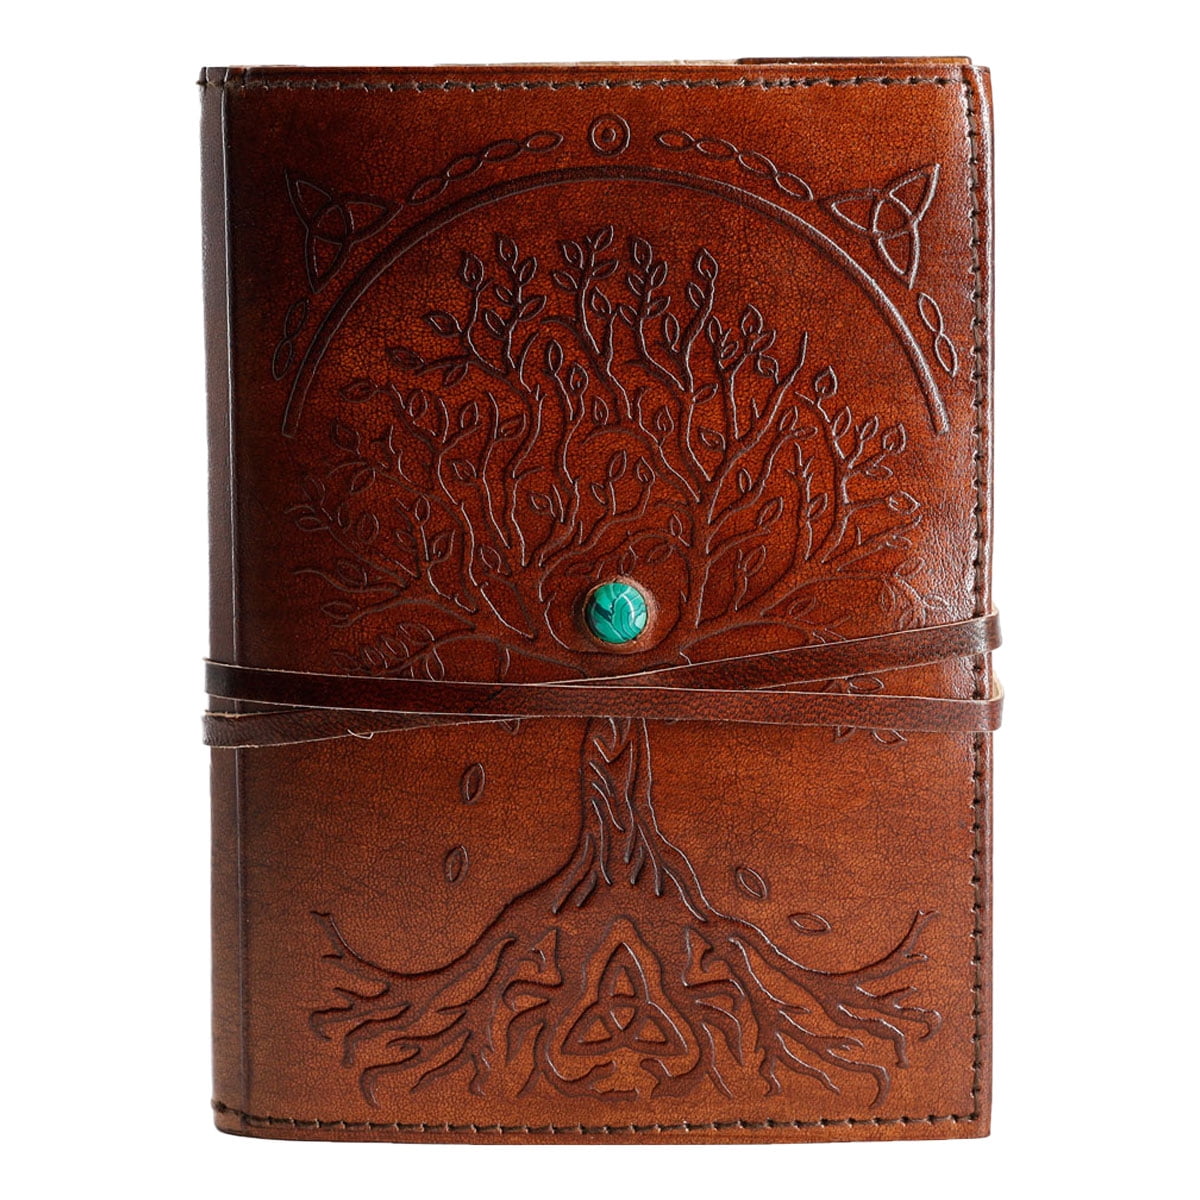 Tree of Life Embossed Leather Bound Journal Notebook Handmade Diary Writing Book 